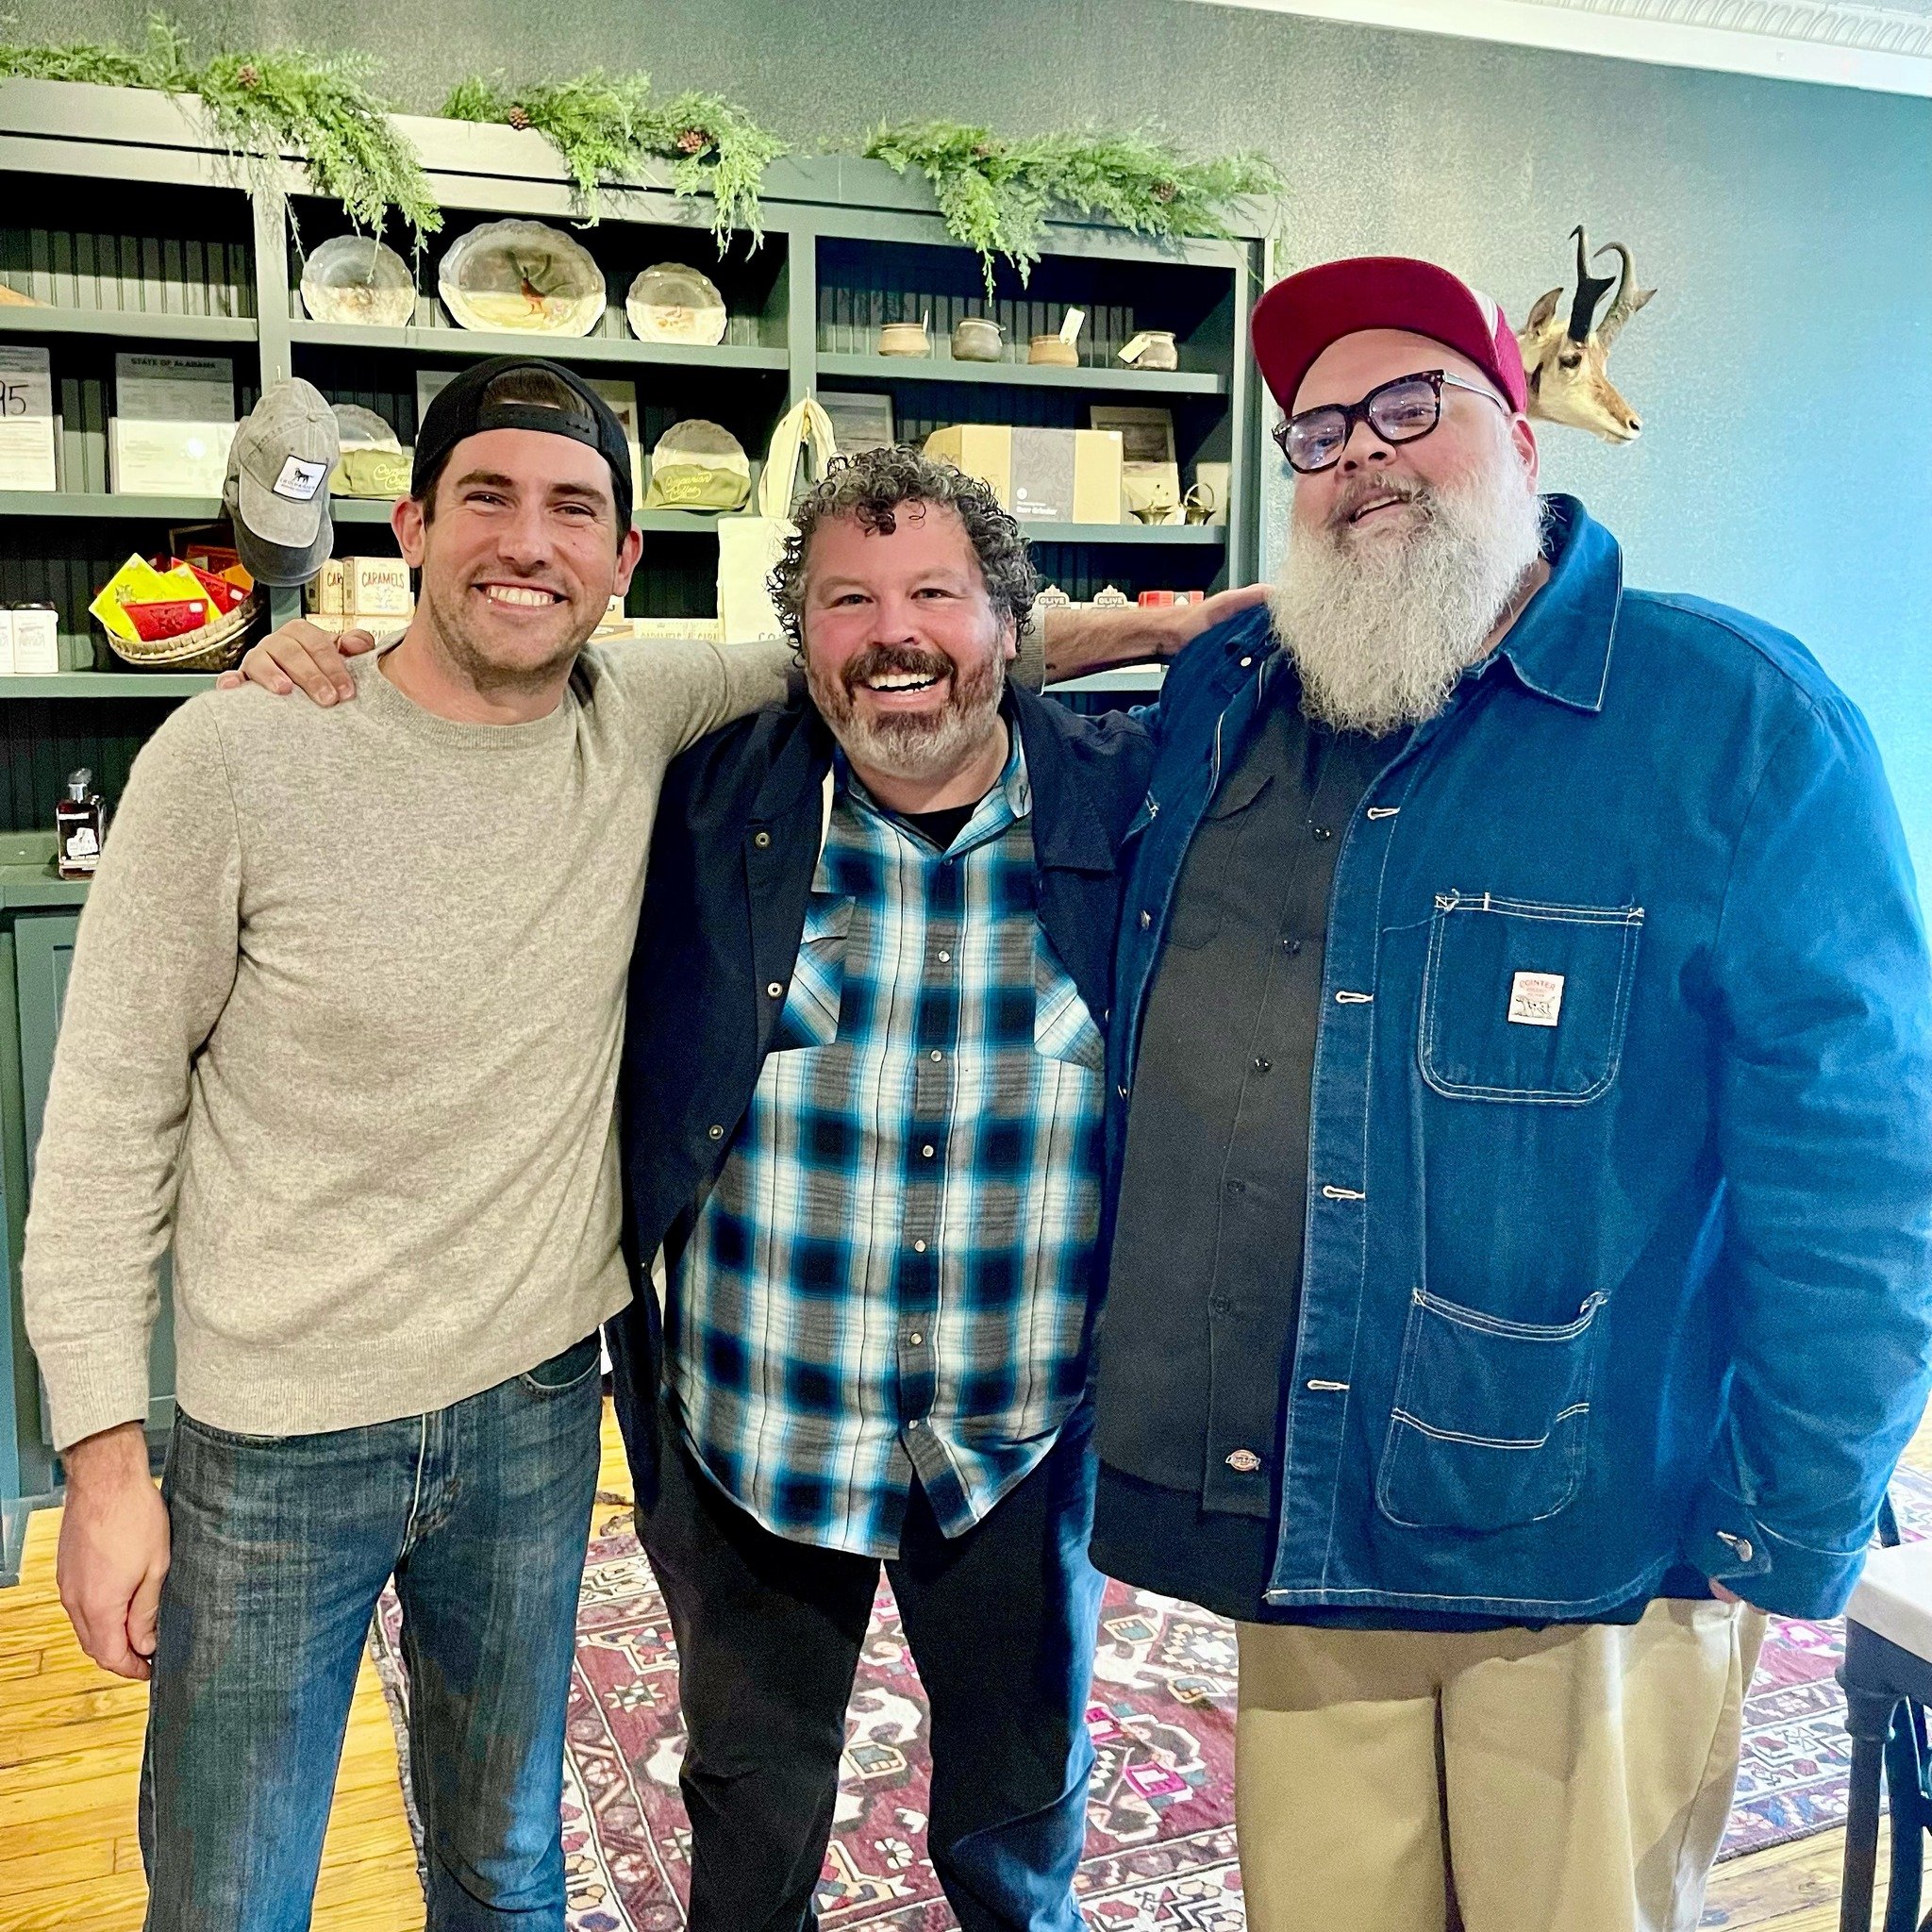 Got to spend the morning with two friends and bond over our love for coffee, real estate, music, and everything in between! 

@isaacjudd is an Oregon-based Realtor and real estate investor, and @patricktetreault is a music producer and Shoals transpl